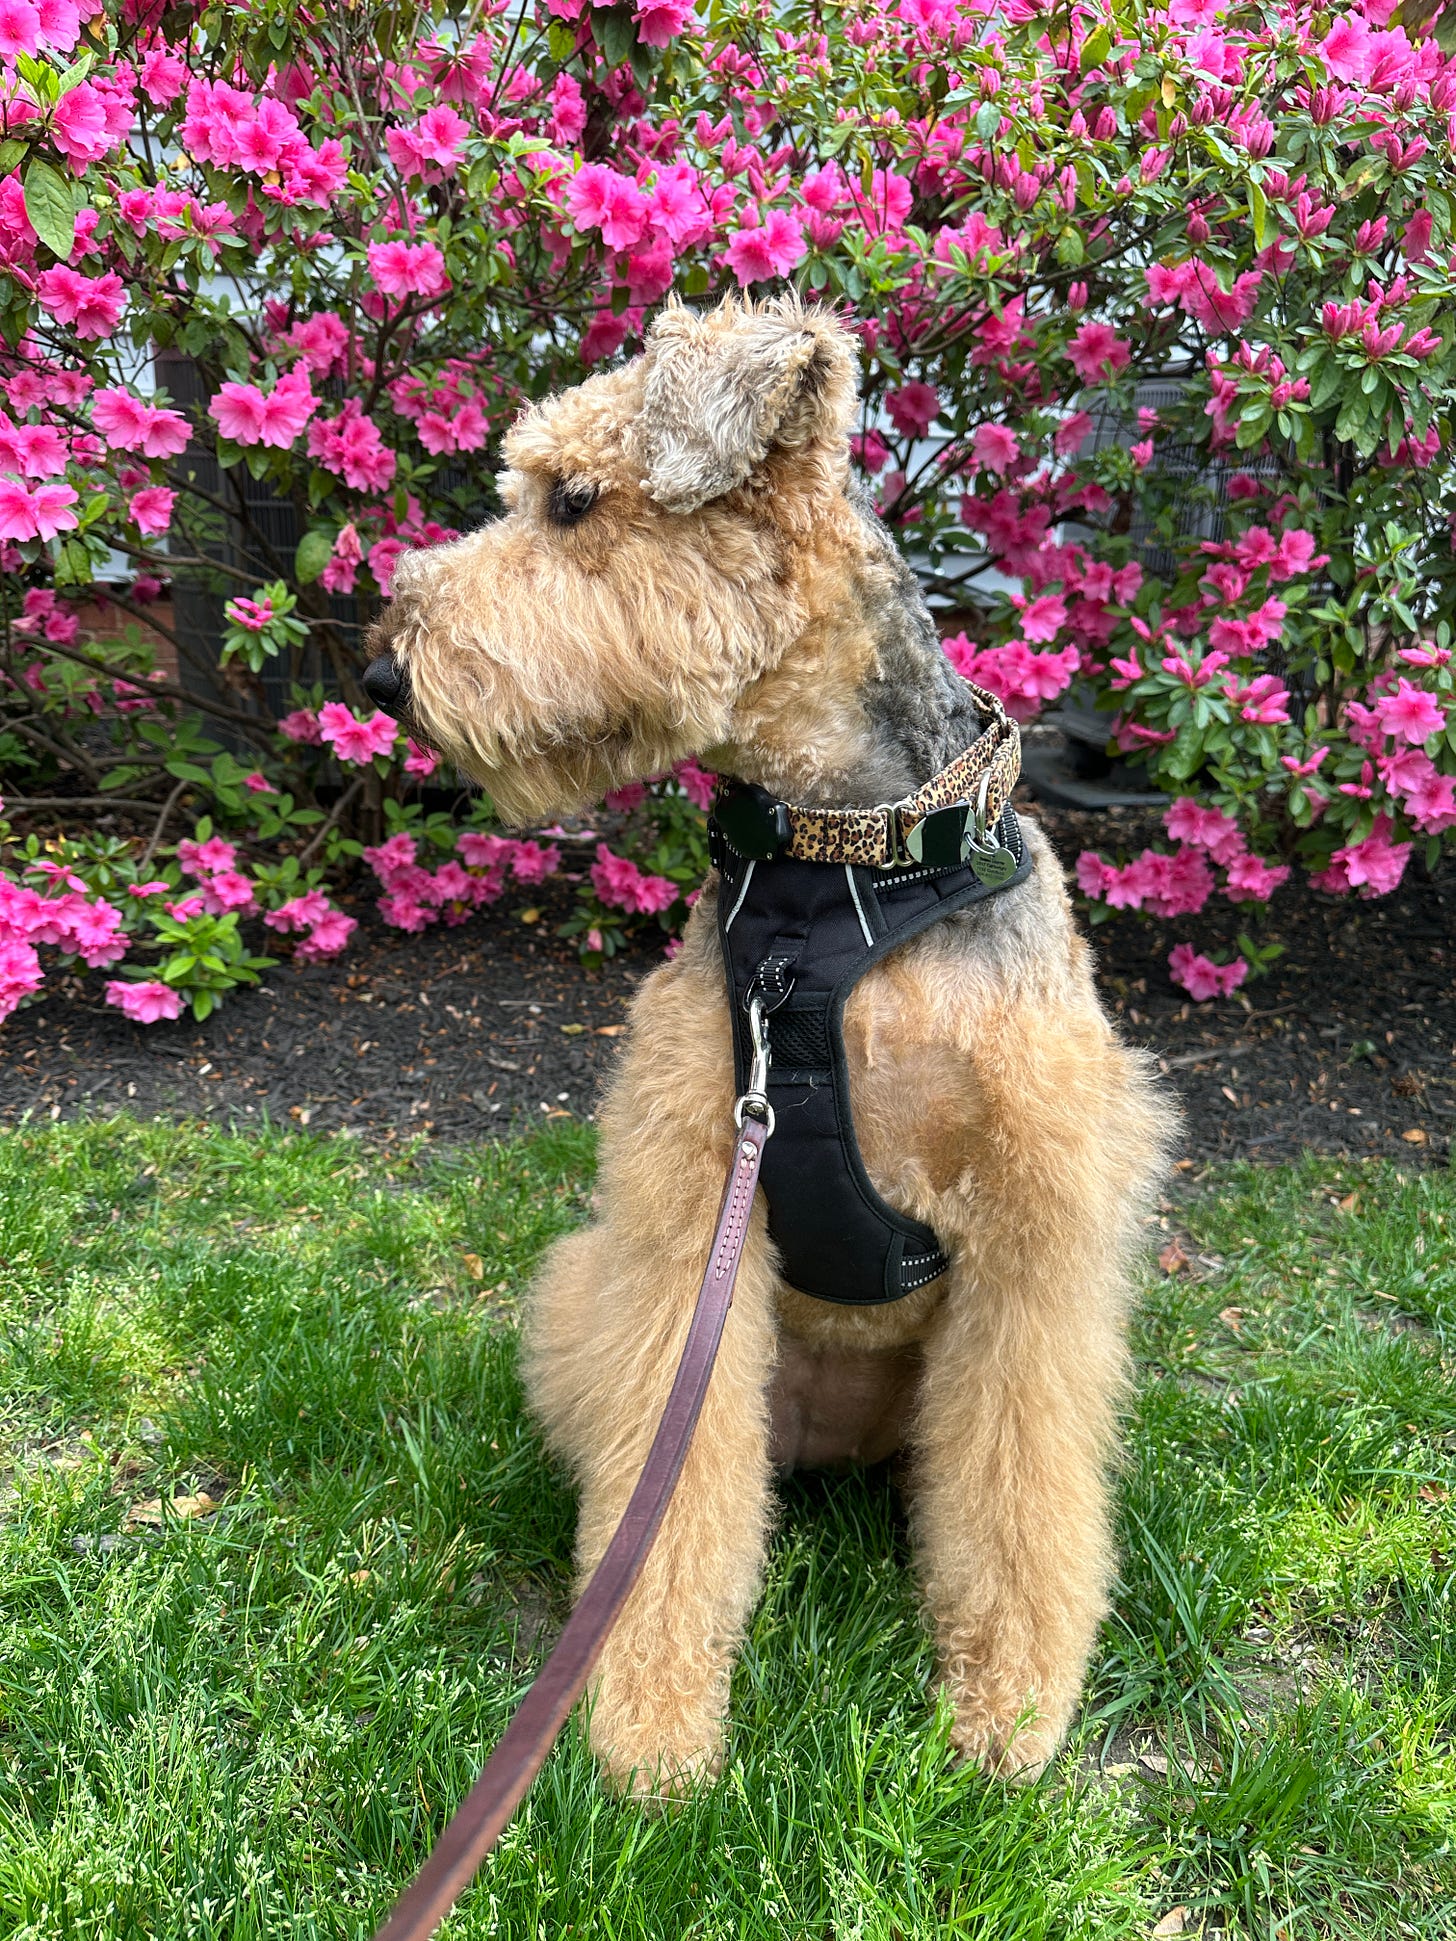 An Airedale terrior in front of pink azalea bushes